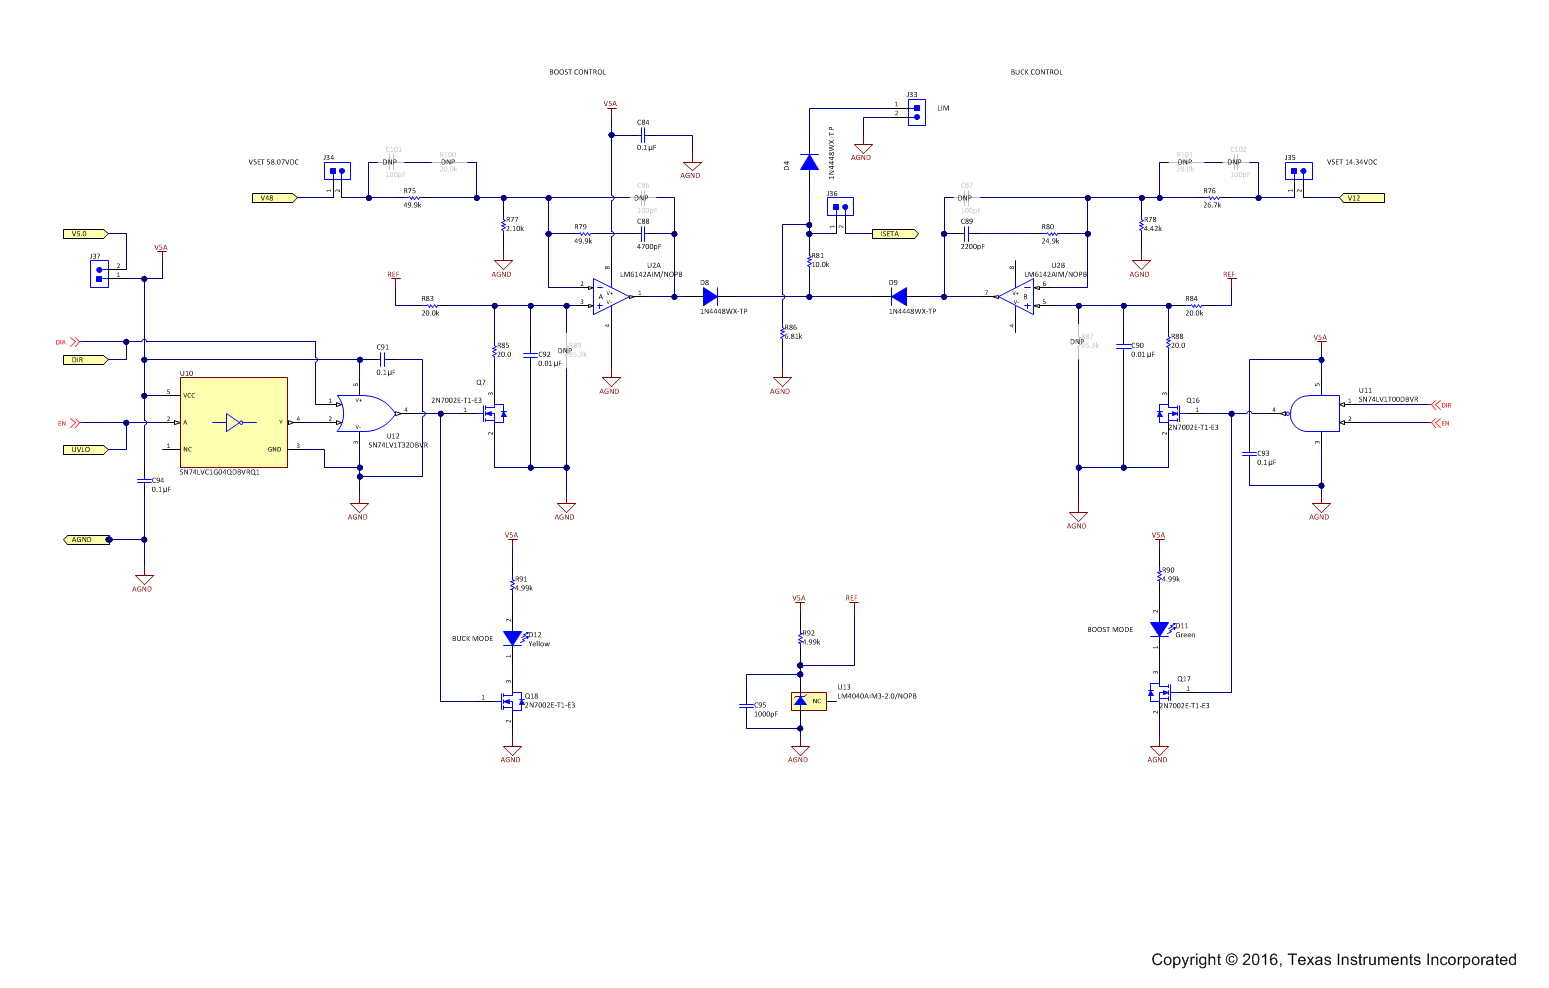 schematic_power_04_outer_loop_snvu543.png